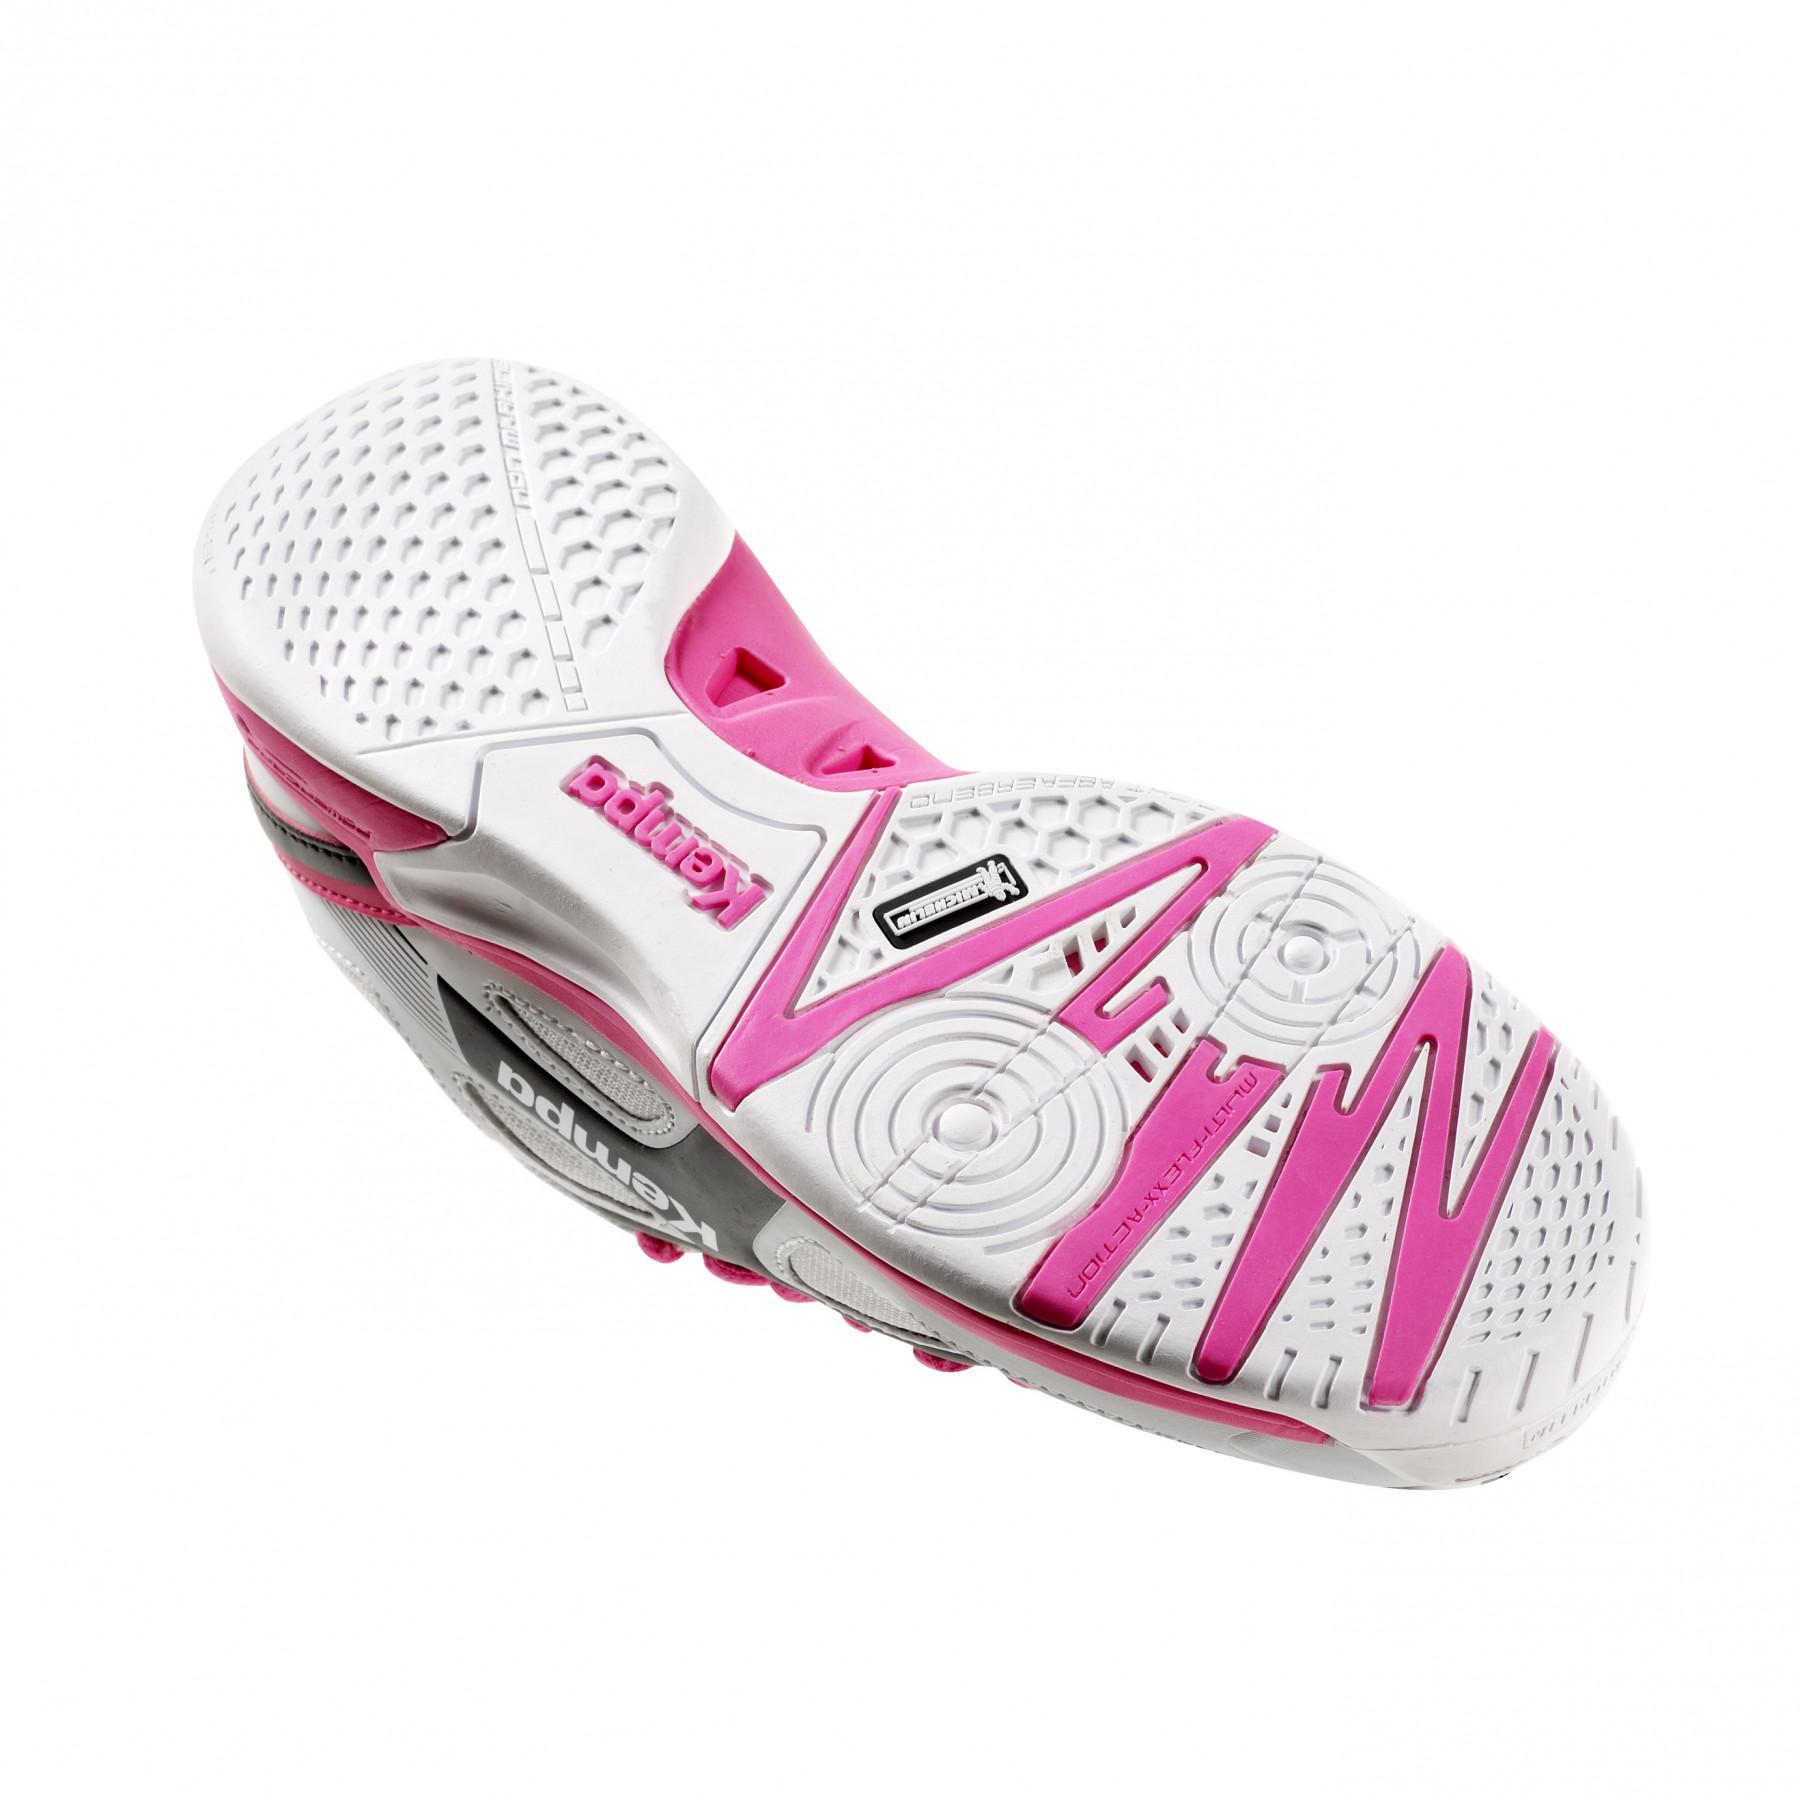 Chaussures femme kid Kempa Wing